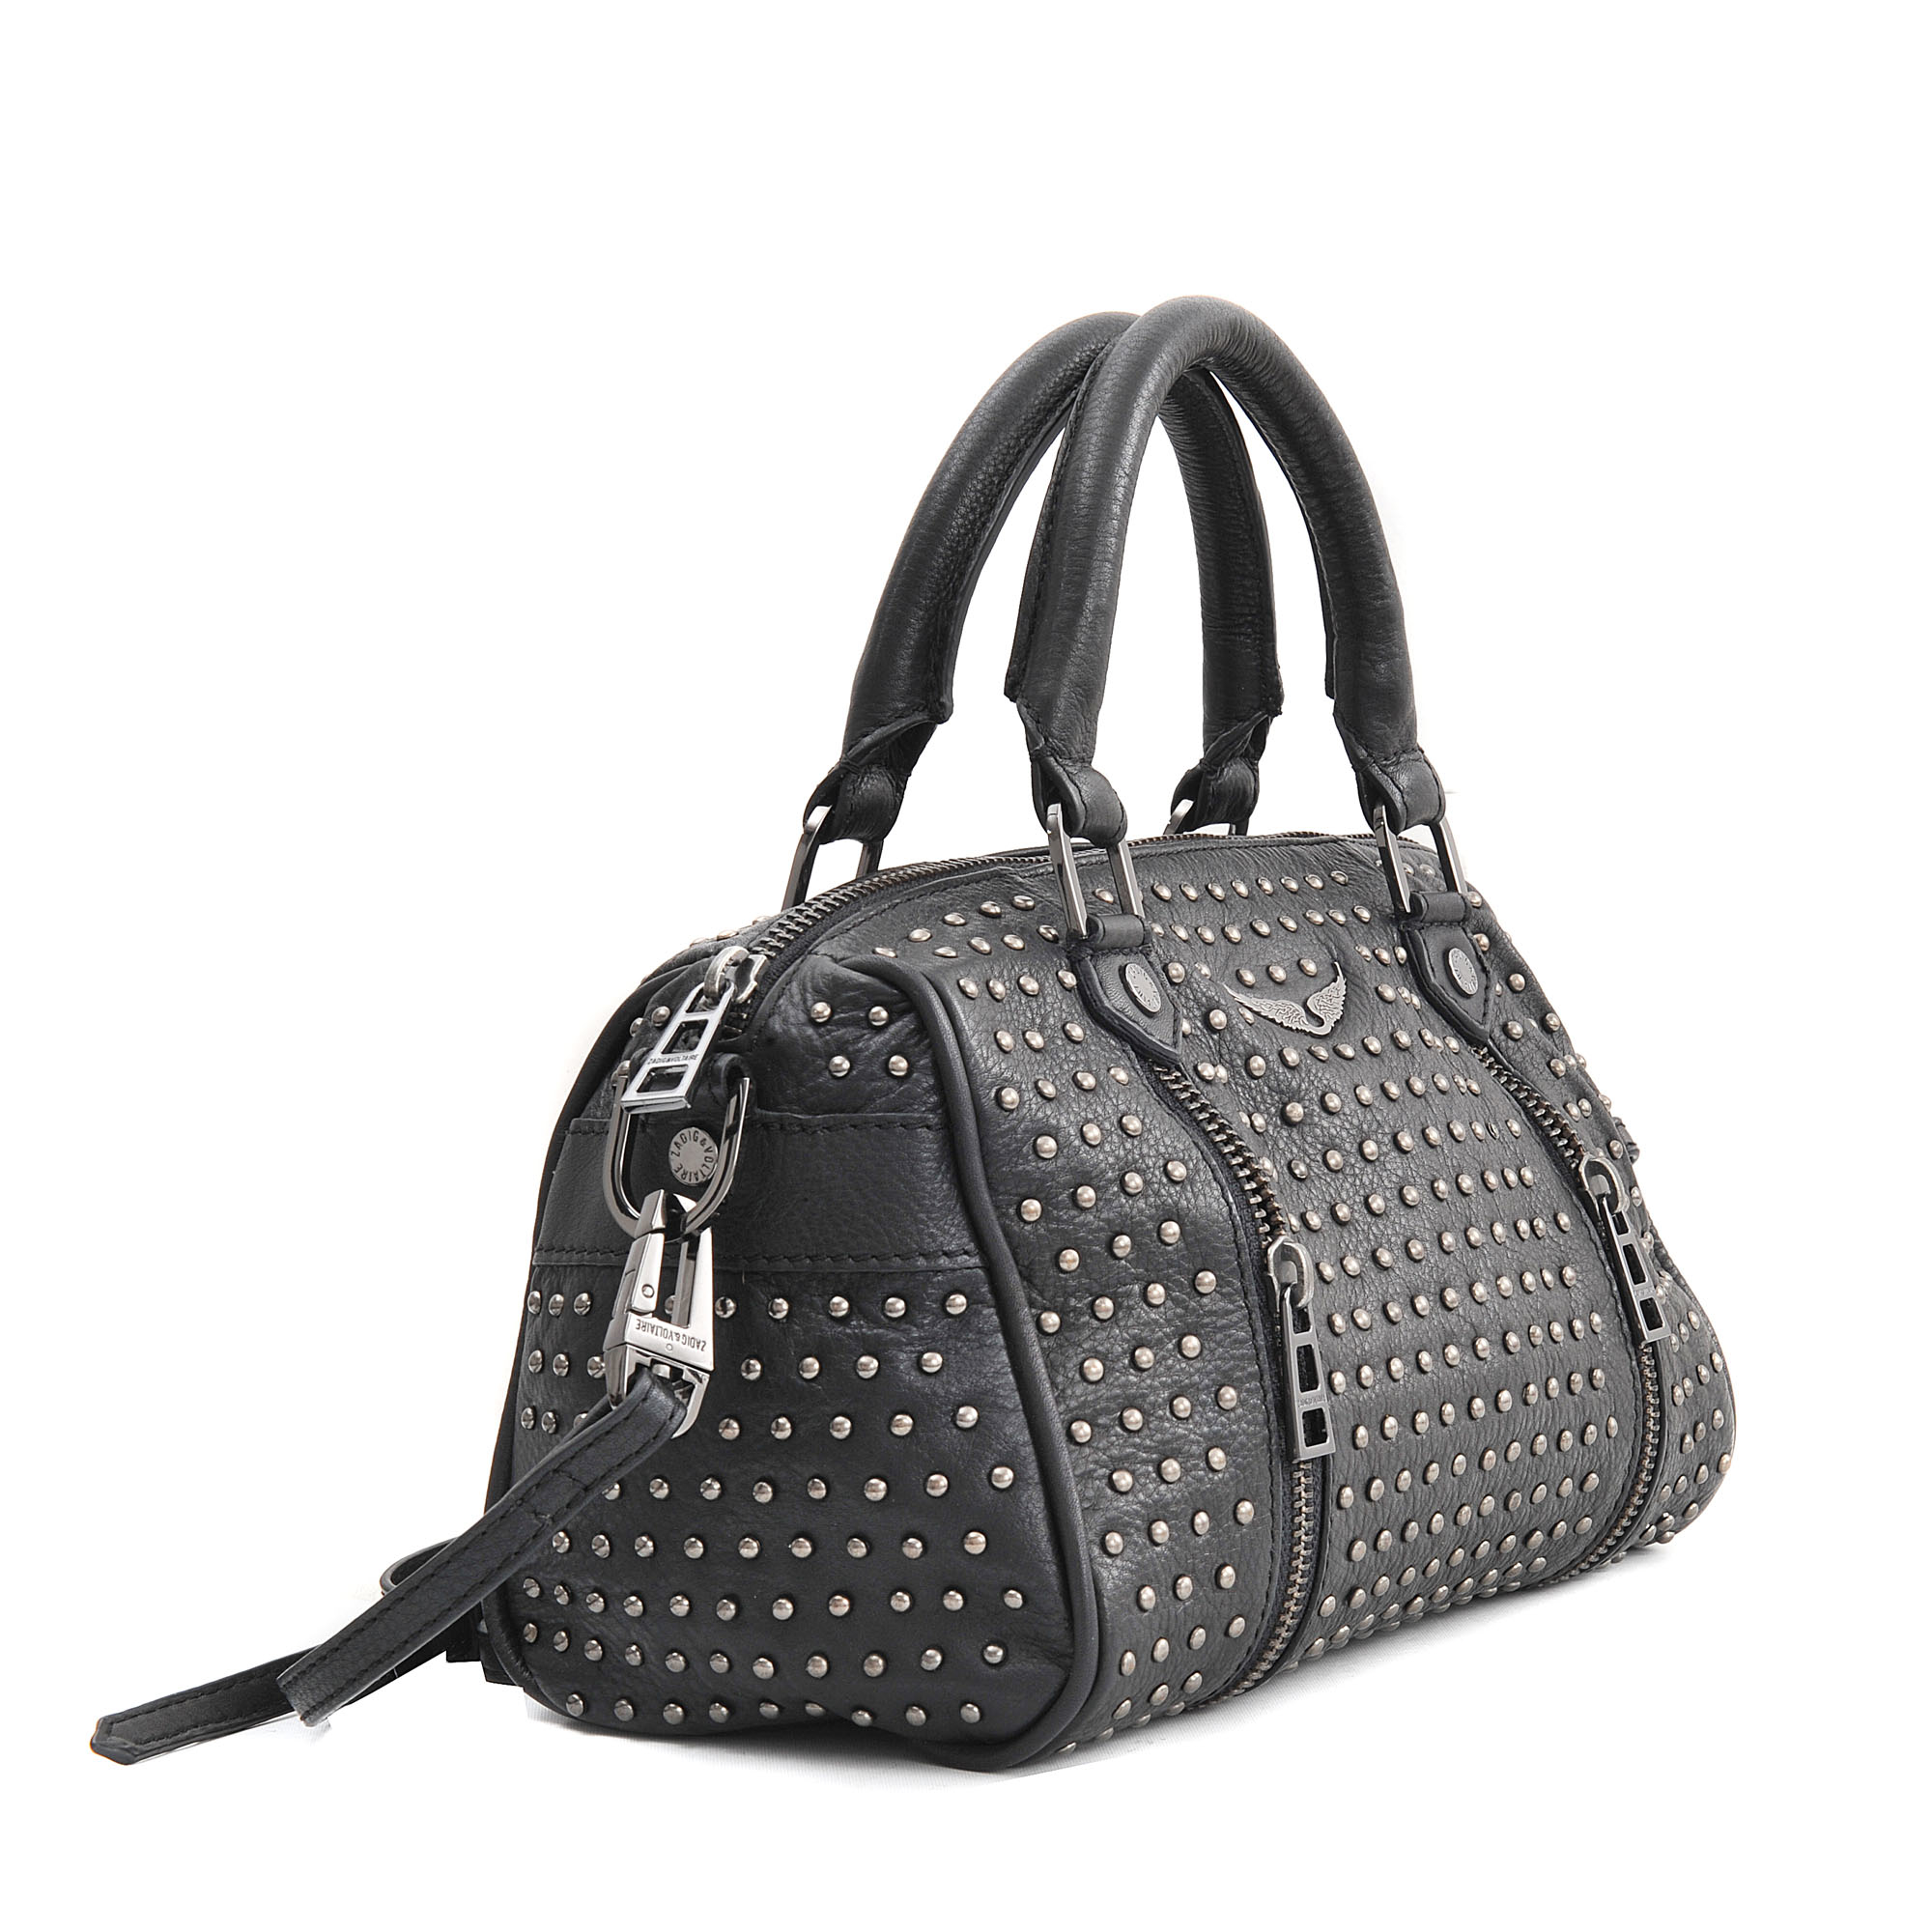 Zadig & Voltaire Xs Sunny Studs Bag in Gray